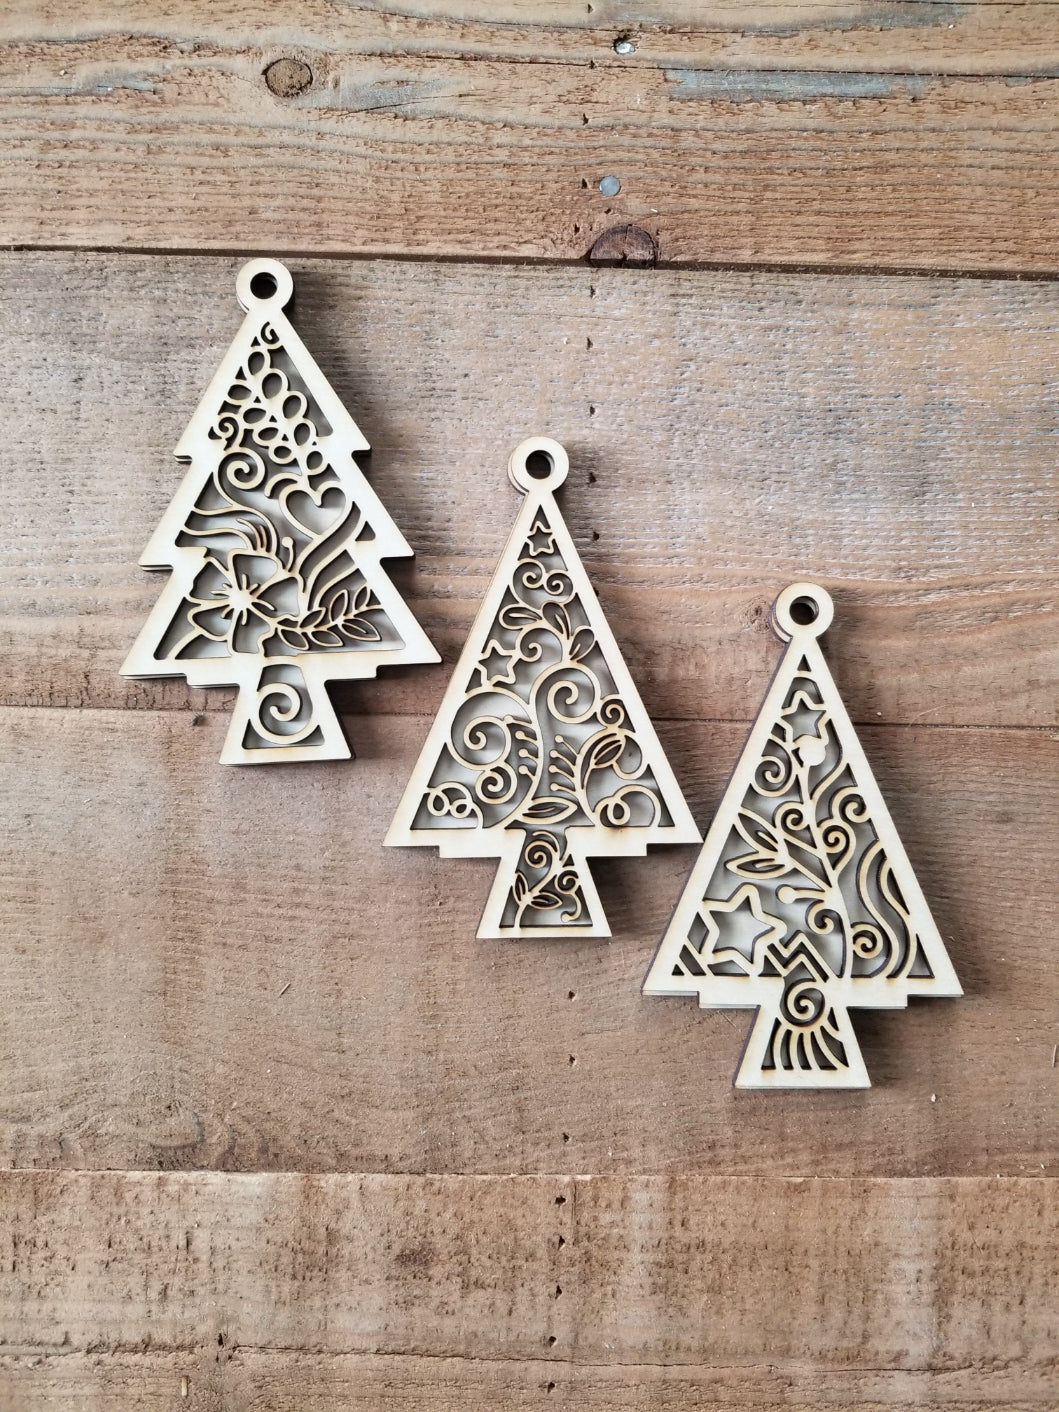 Tree  Pine  Ornaments  Ornament  Merry Christmas  Merry & Bright  Merry  Holly  Holidays  Holiday decoration  Holiday  Ho Ho Ho  Door Tags  Door Tag  Door Hanger  Door  DIY Kit  diy  Decoration  Christmas Tree  Christmas time  Christmas Season  Christmas  Celebration